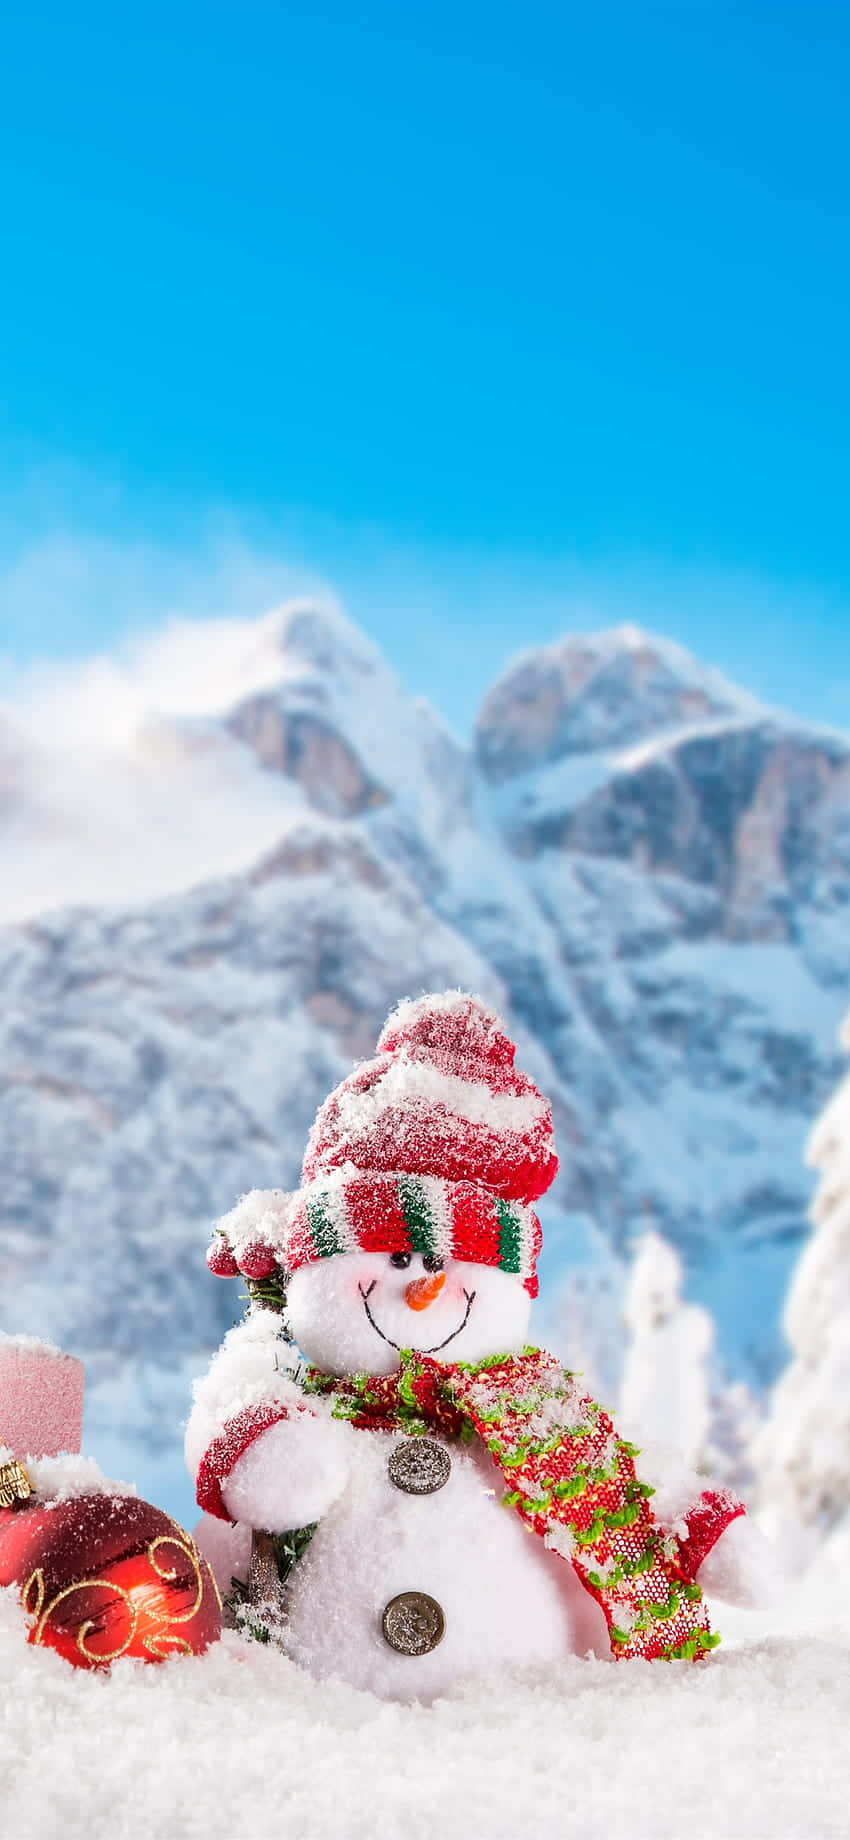 Snowman In The Snow With Gifts And Snow Wallpaper